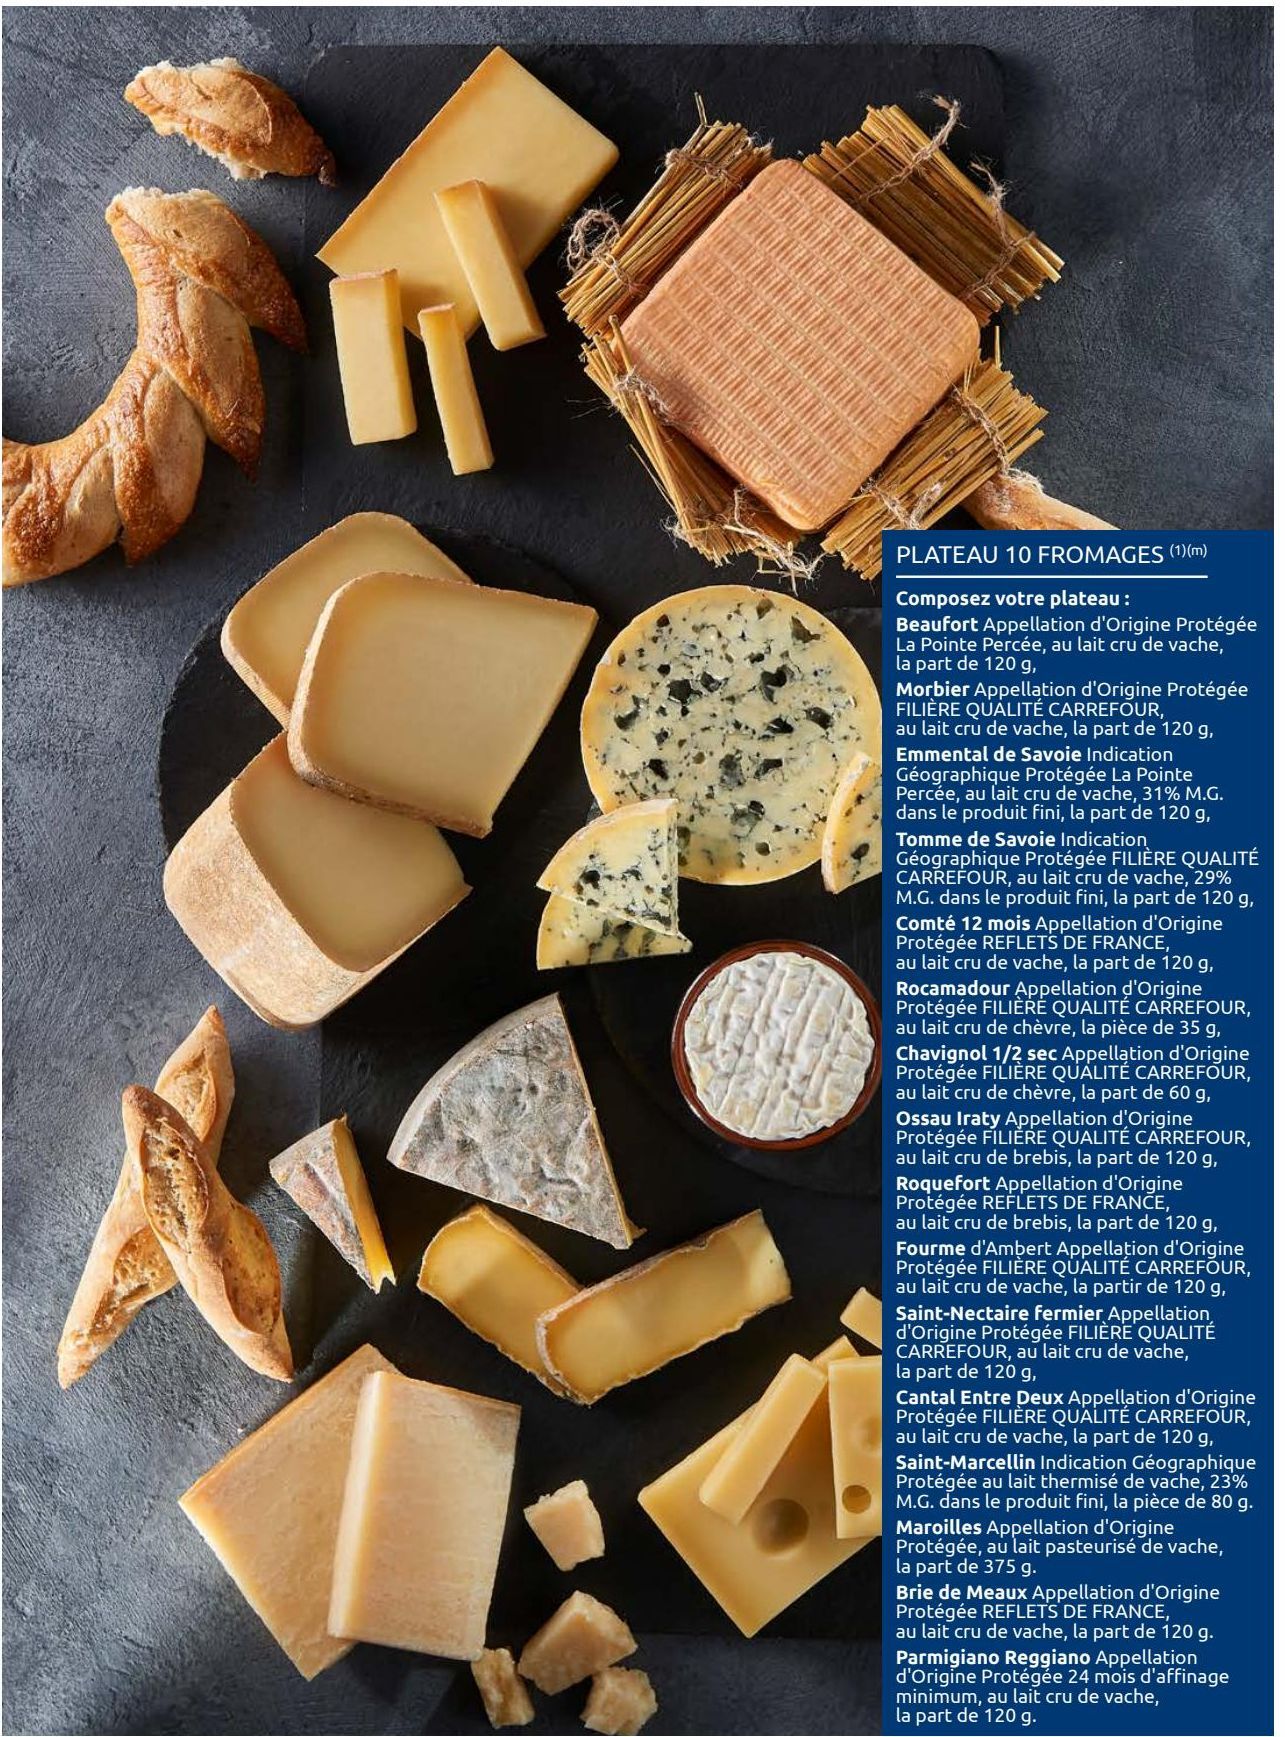 PLATEAU 10 FROMAGES